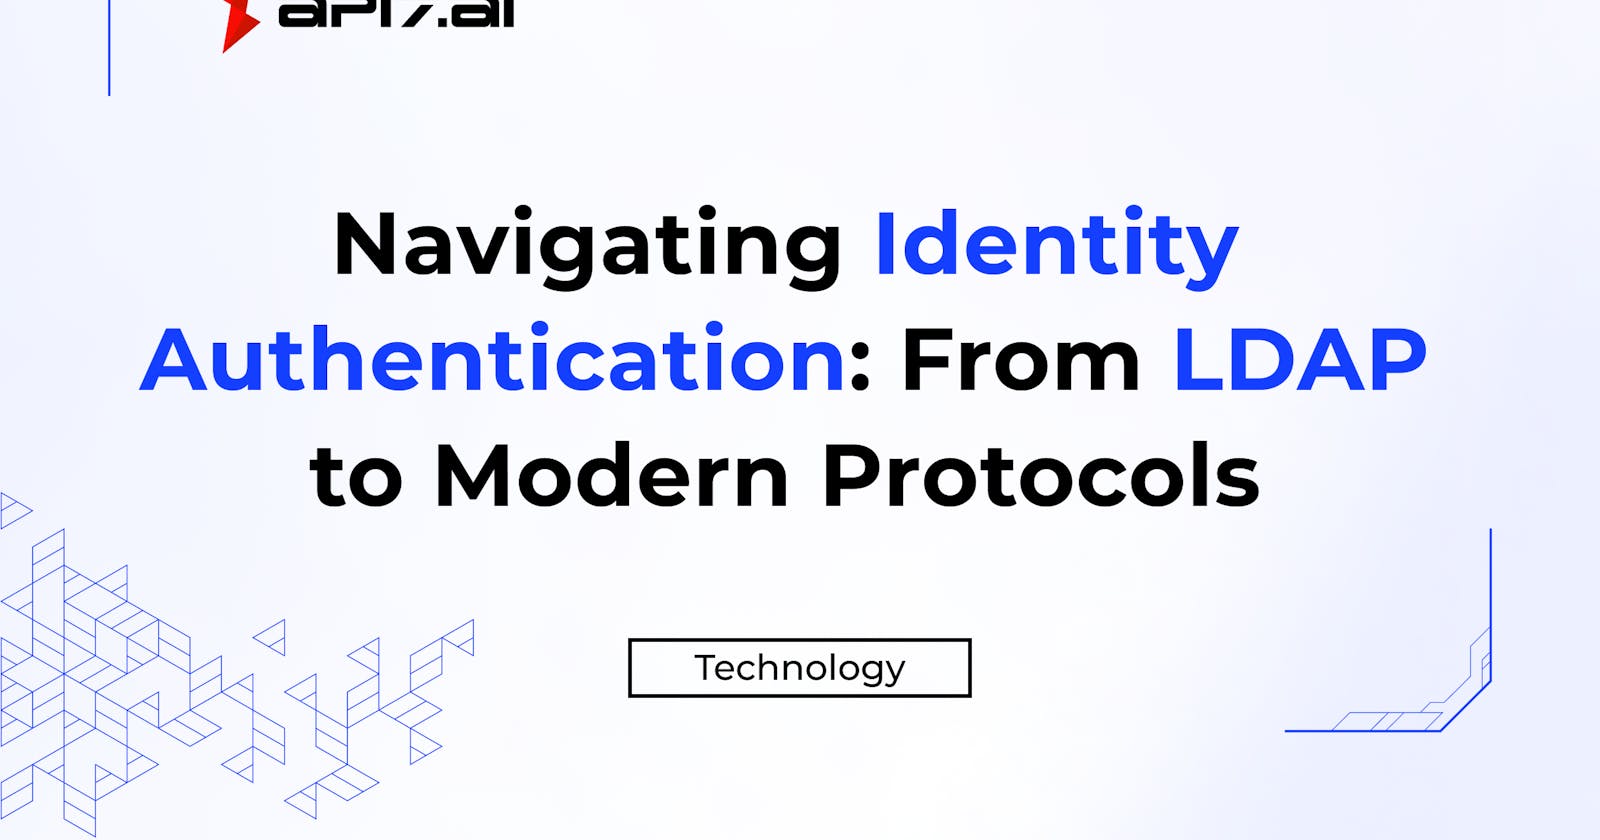 Navigating Identity Authentication: From LDAP to Modern Protocols